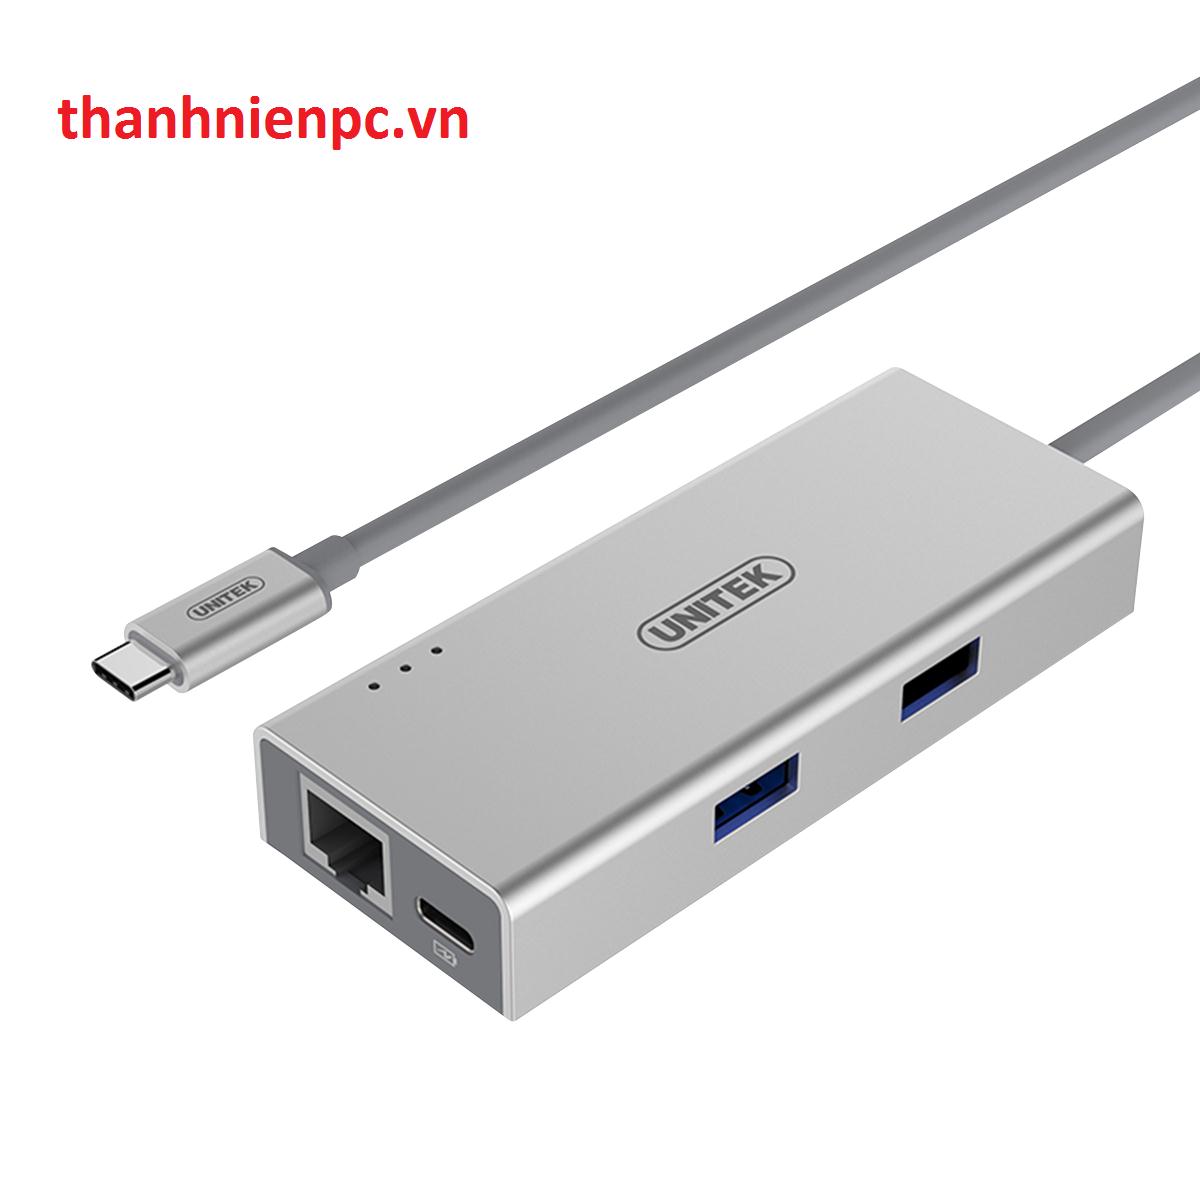 USB3.1 Type-C Aluminium Multiport Hub with Power Delivery